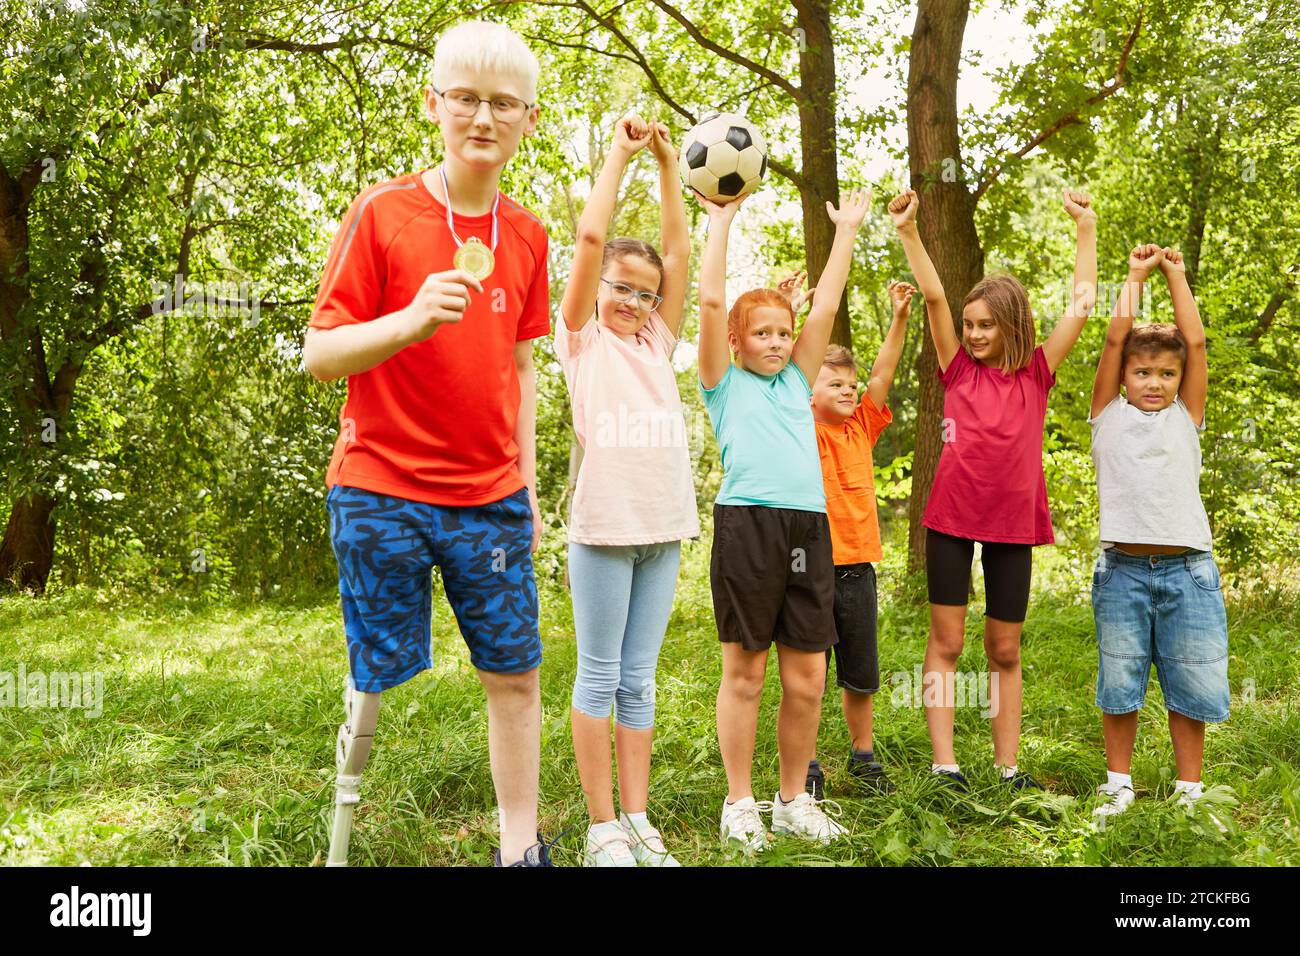 Handicapped boy showing medal with cheerful friends celebrating victory at park Stock Photo